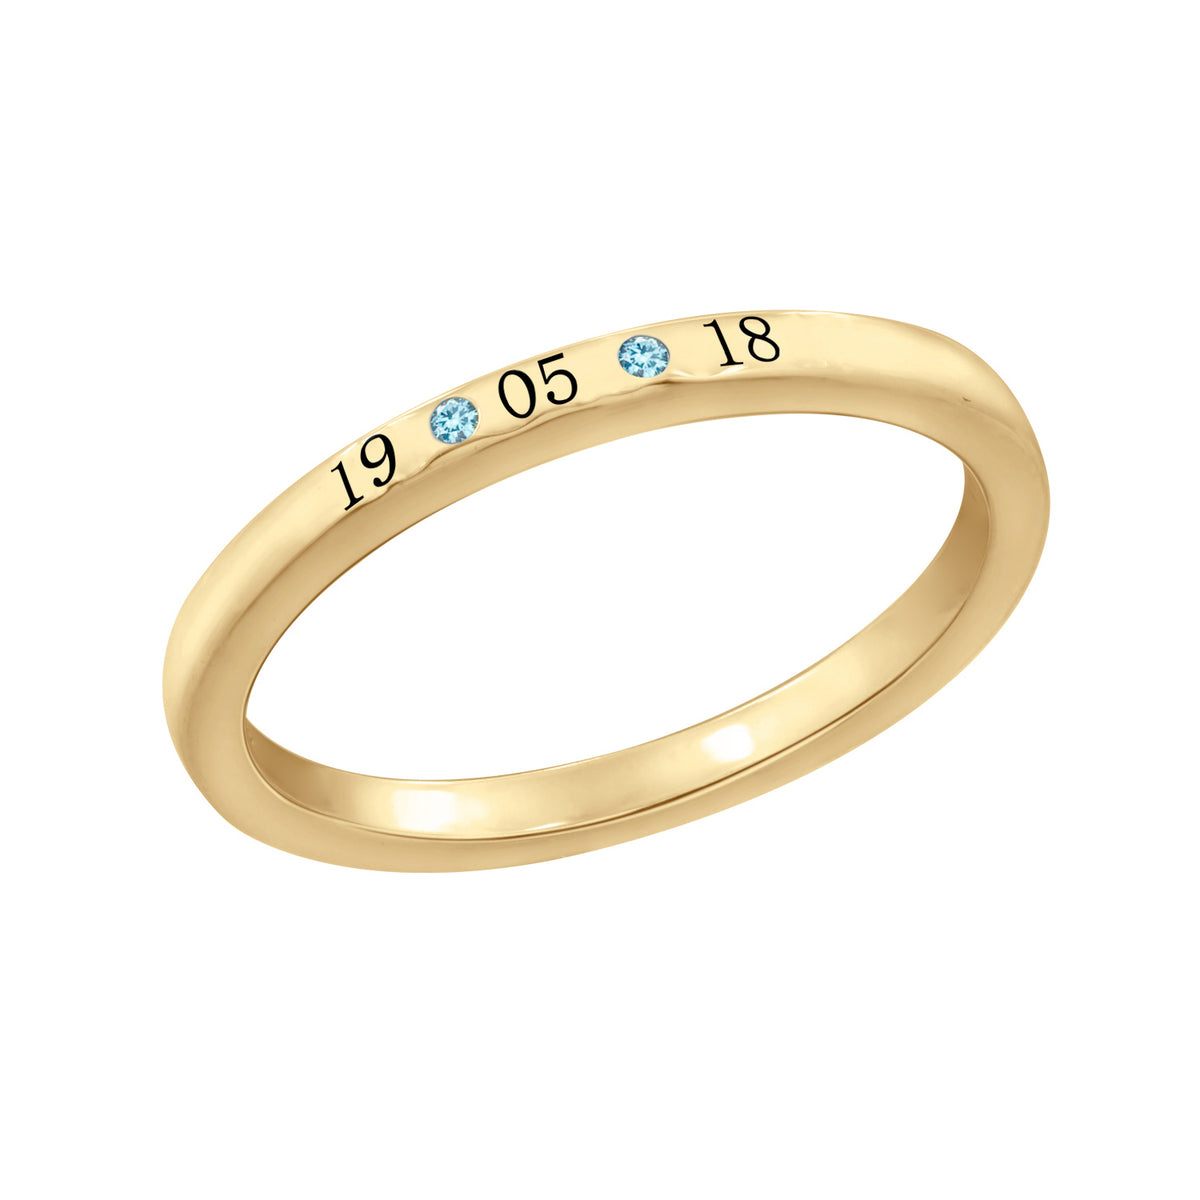 Personalized Date Ring